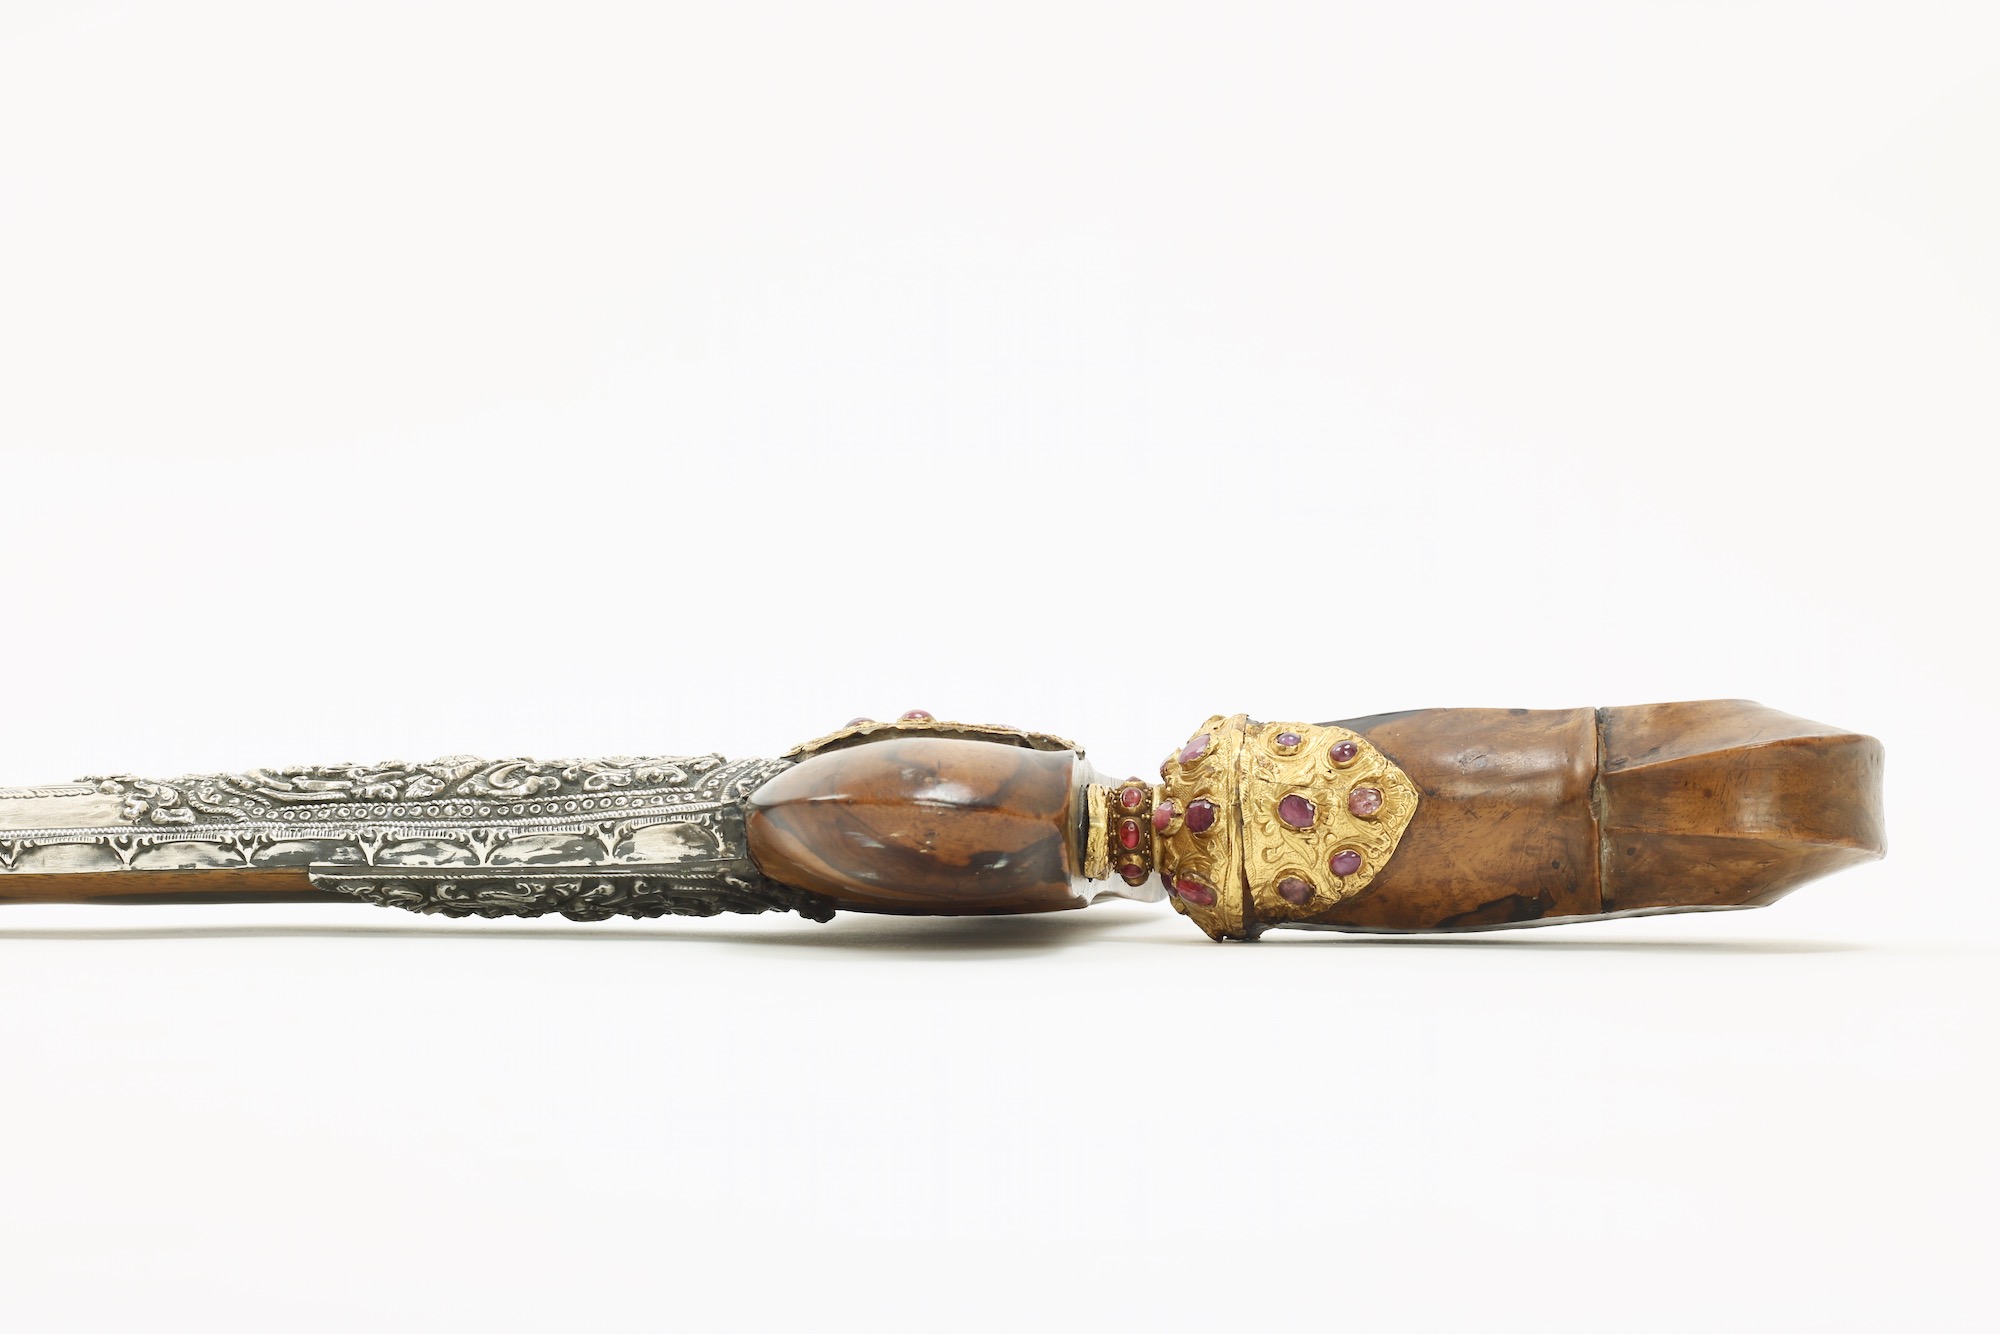 A Balinese keris with golden and gemstone decoration